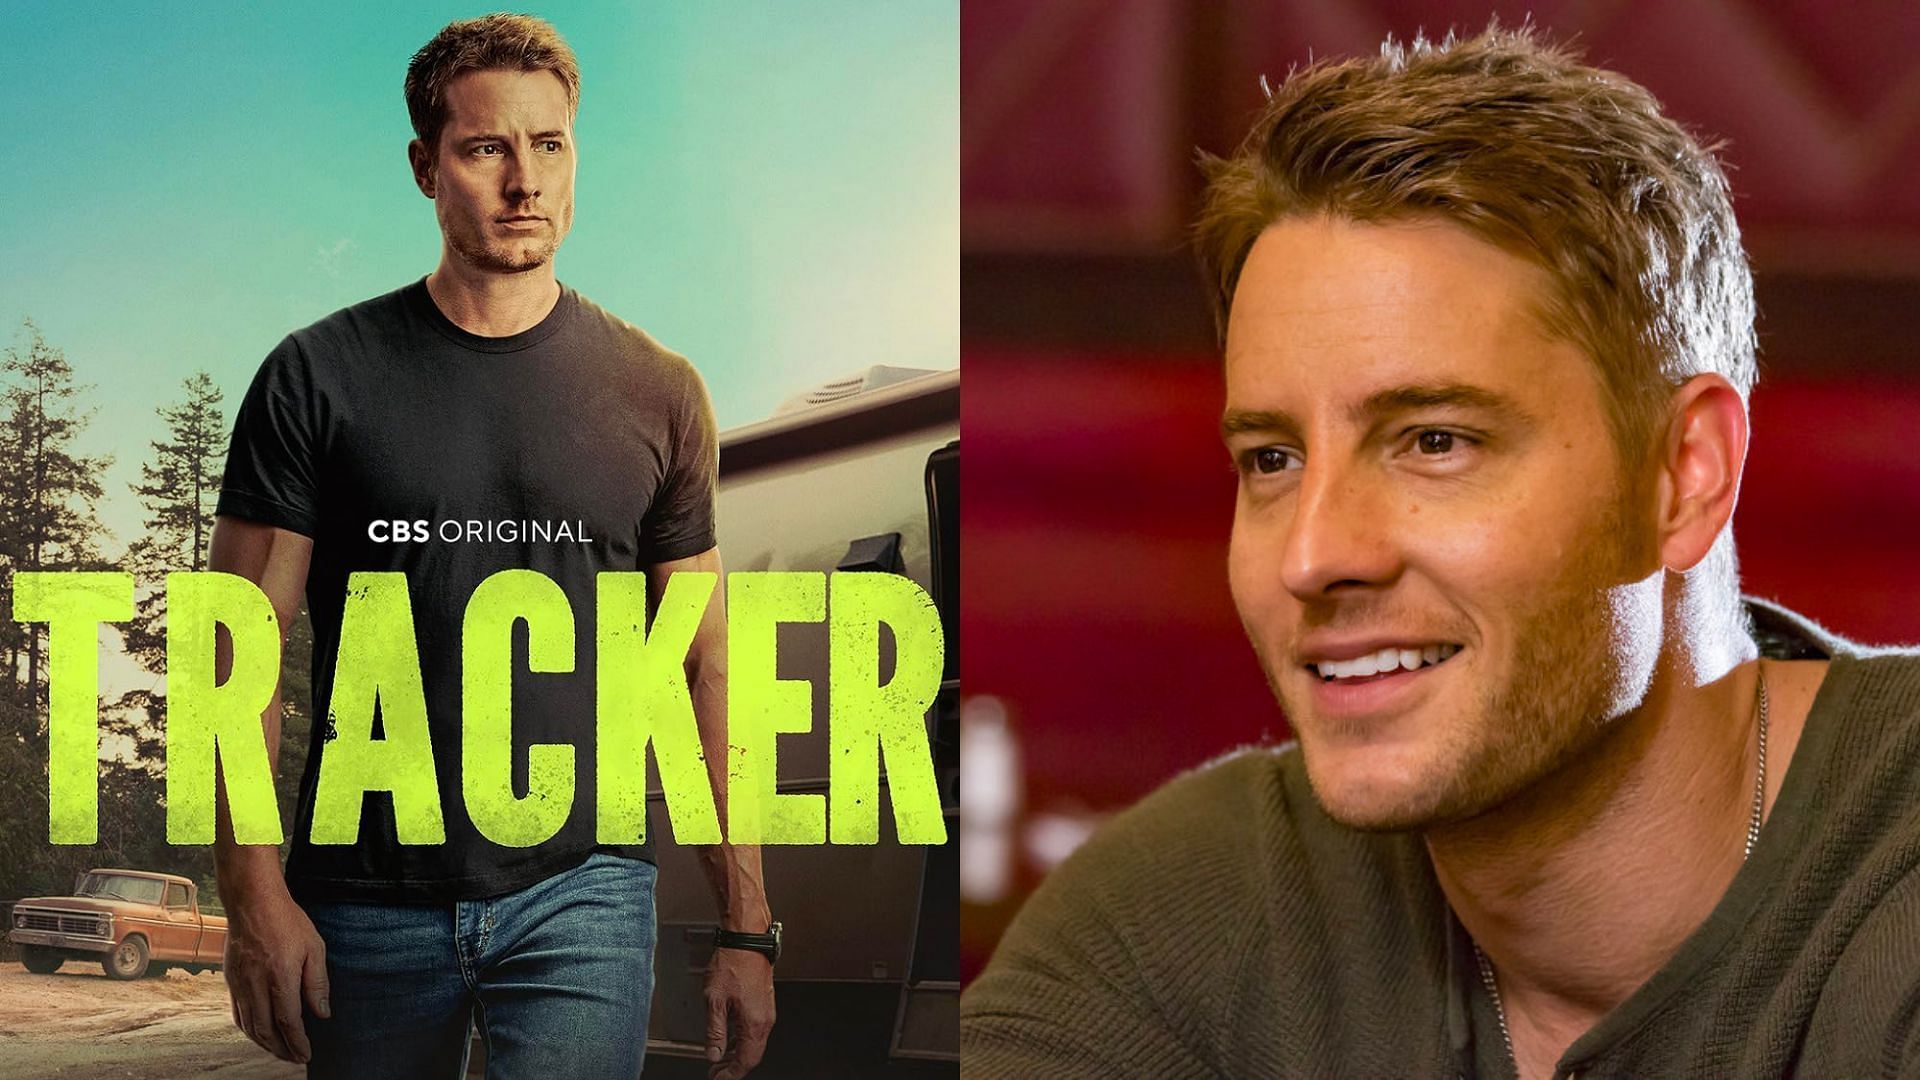 Tracker Season 1 (L) is led by actor Justin Hartley (R) (Images via CBS and Ron Batzdorff/NBC)